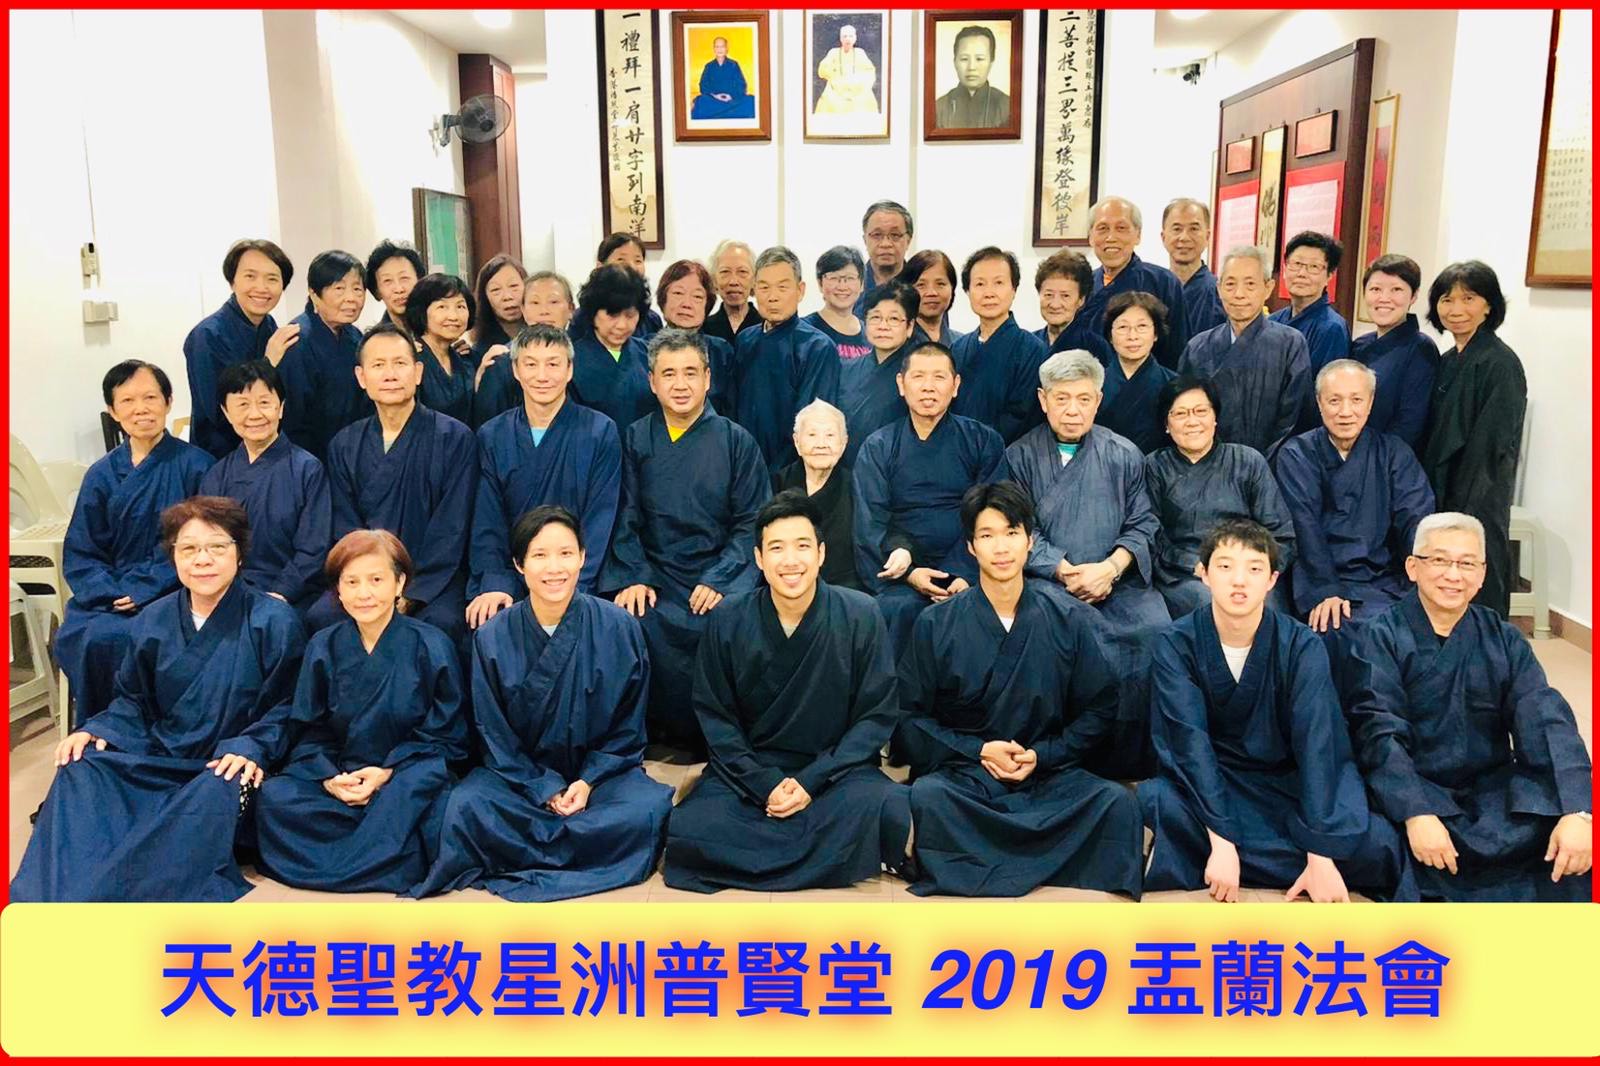 Group photo in Singapore Tien Teck Po Yuan Tong during 7 days recite sutra in the "Ghost Festival"